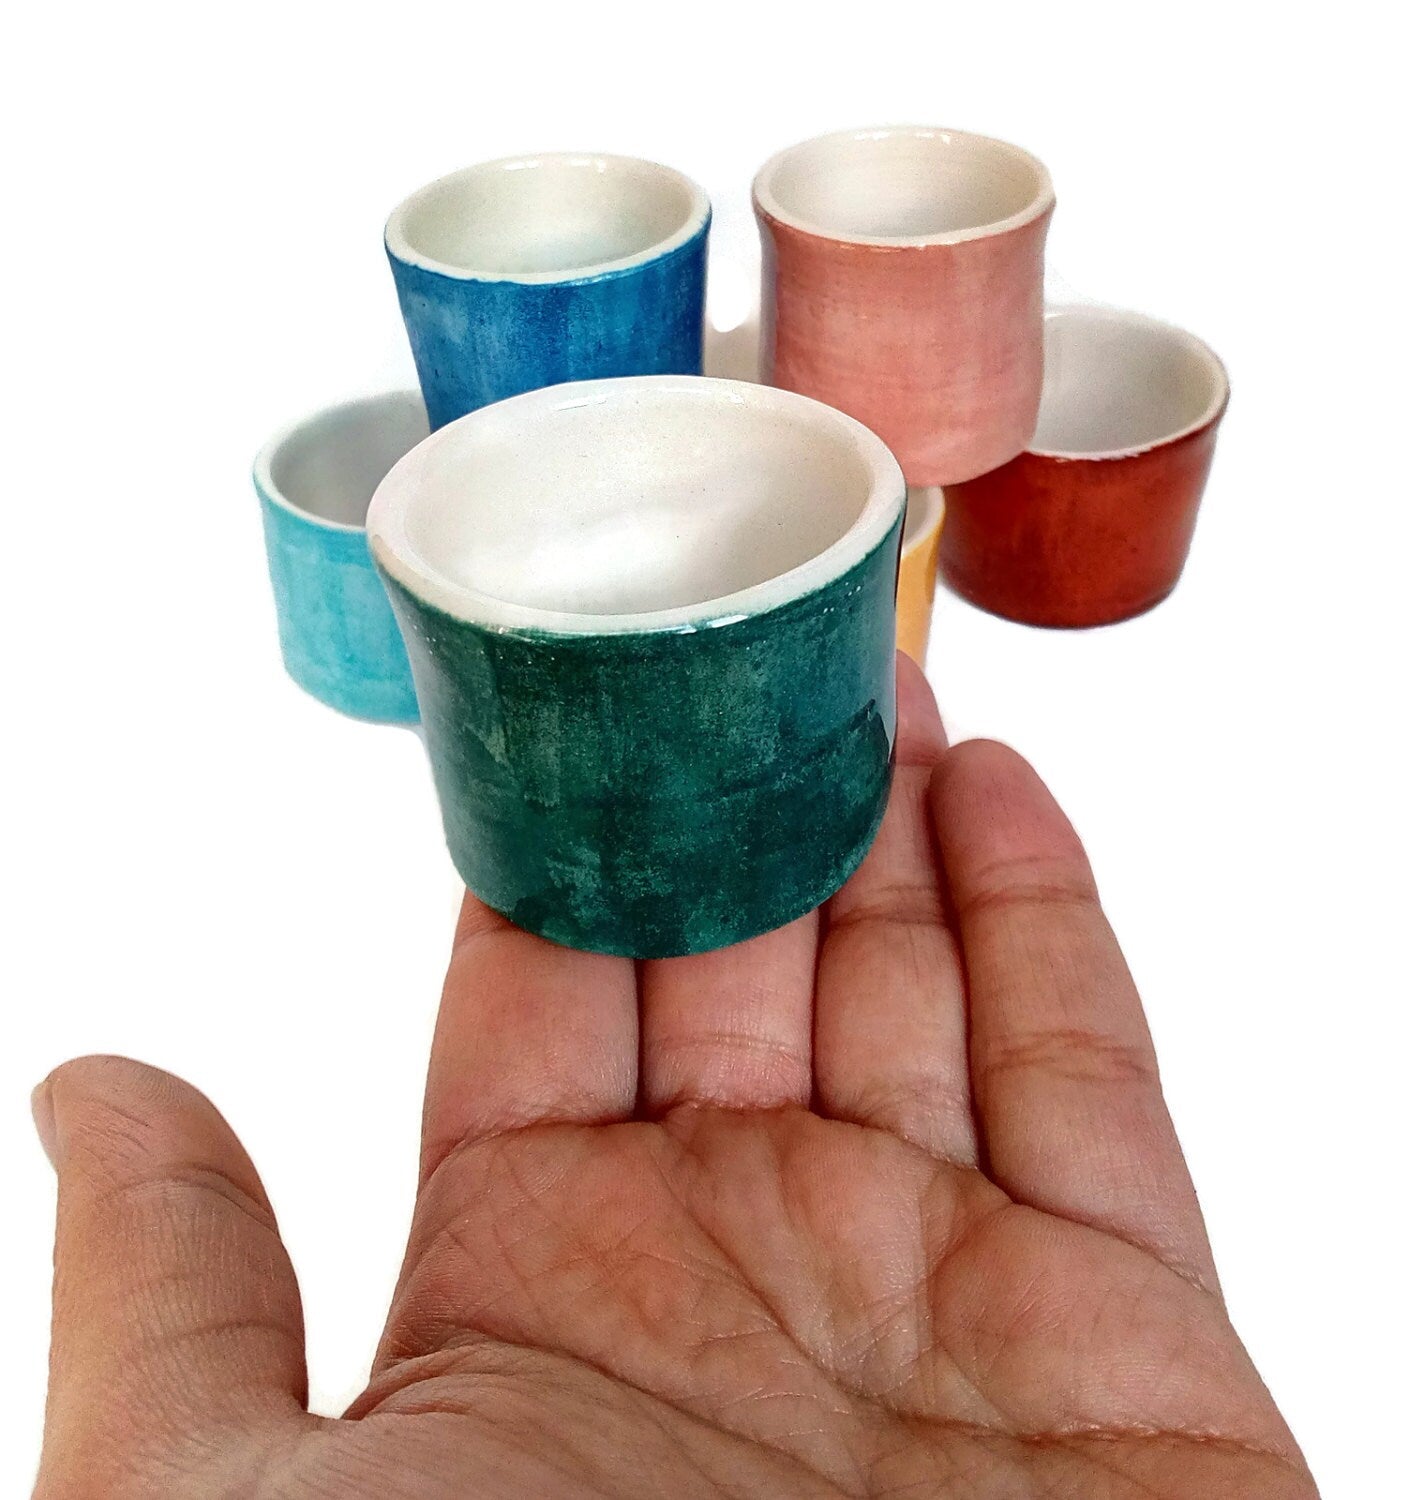 handmade espresso cup ceramic, pottery shot glass, cute gift for mom, coffee lover gift for women, stocking stuffers for women, best sellers - Ceramica Ana Rafael